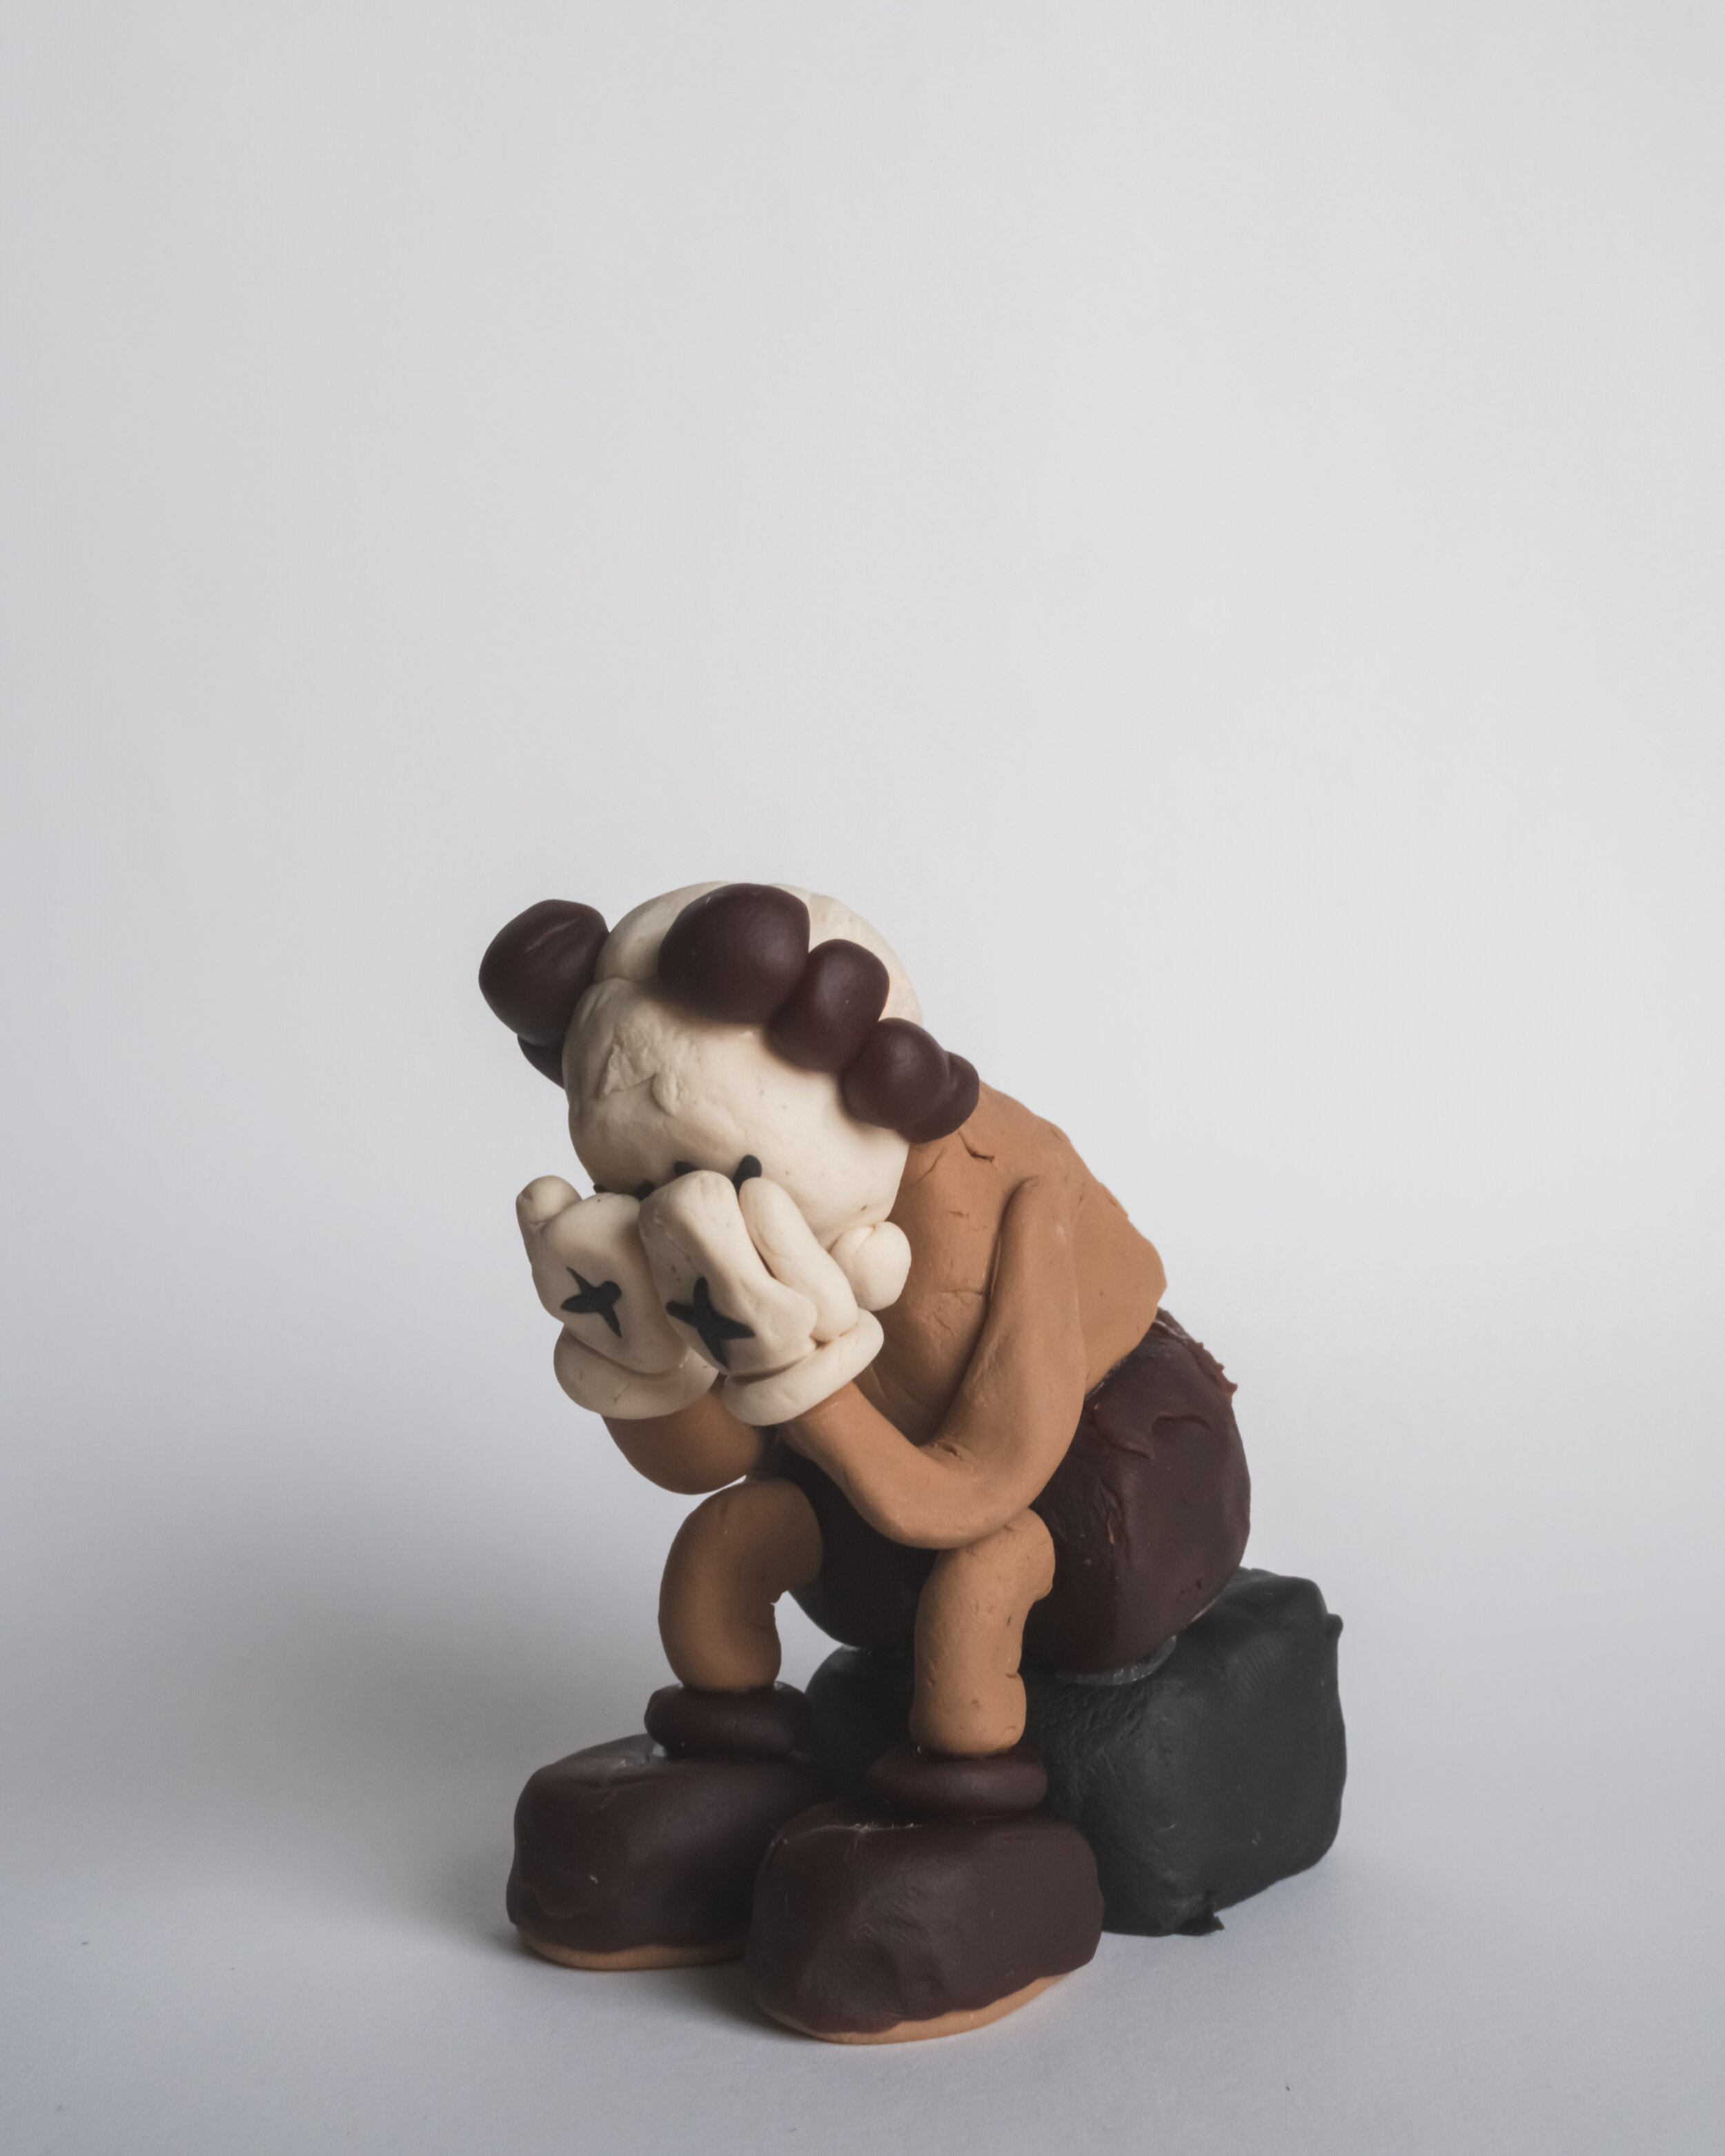 Reconstruction of "Passing Through" by KAWS